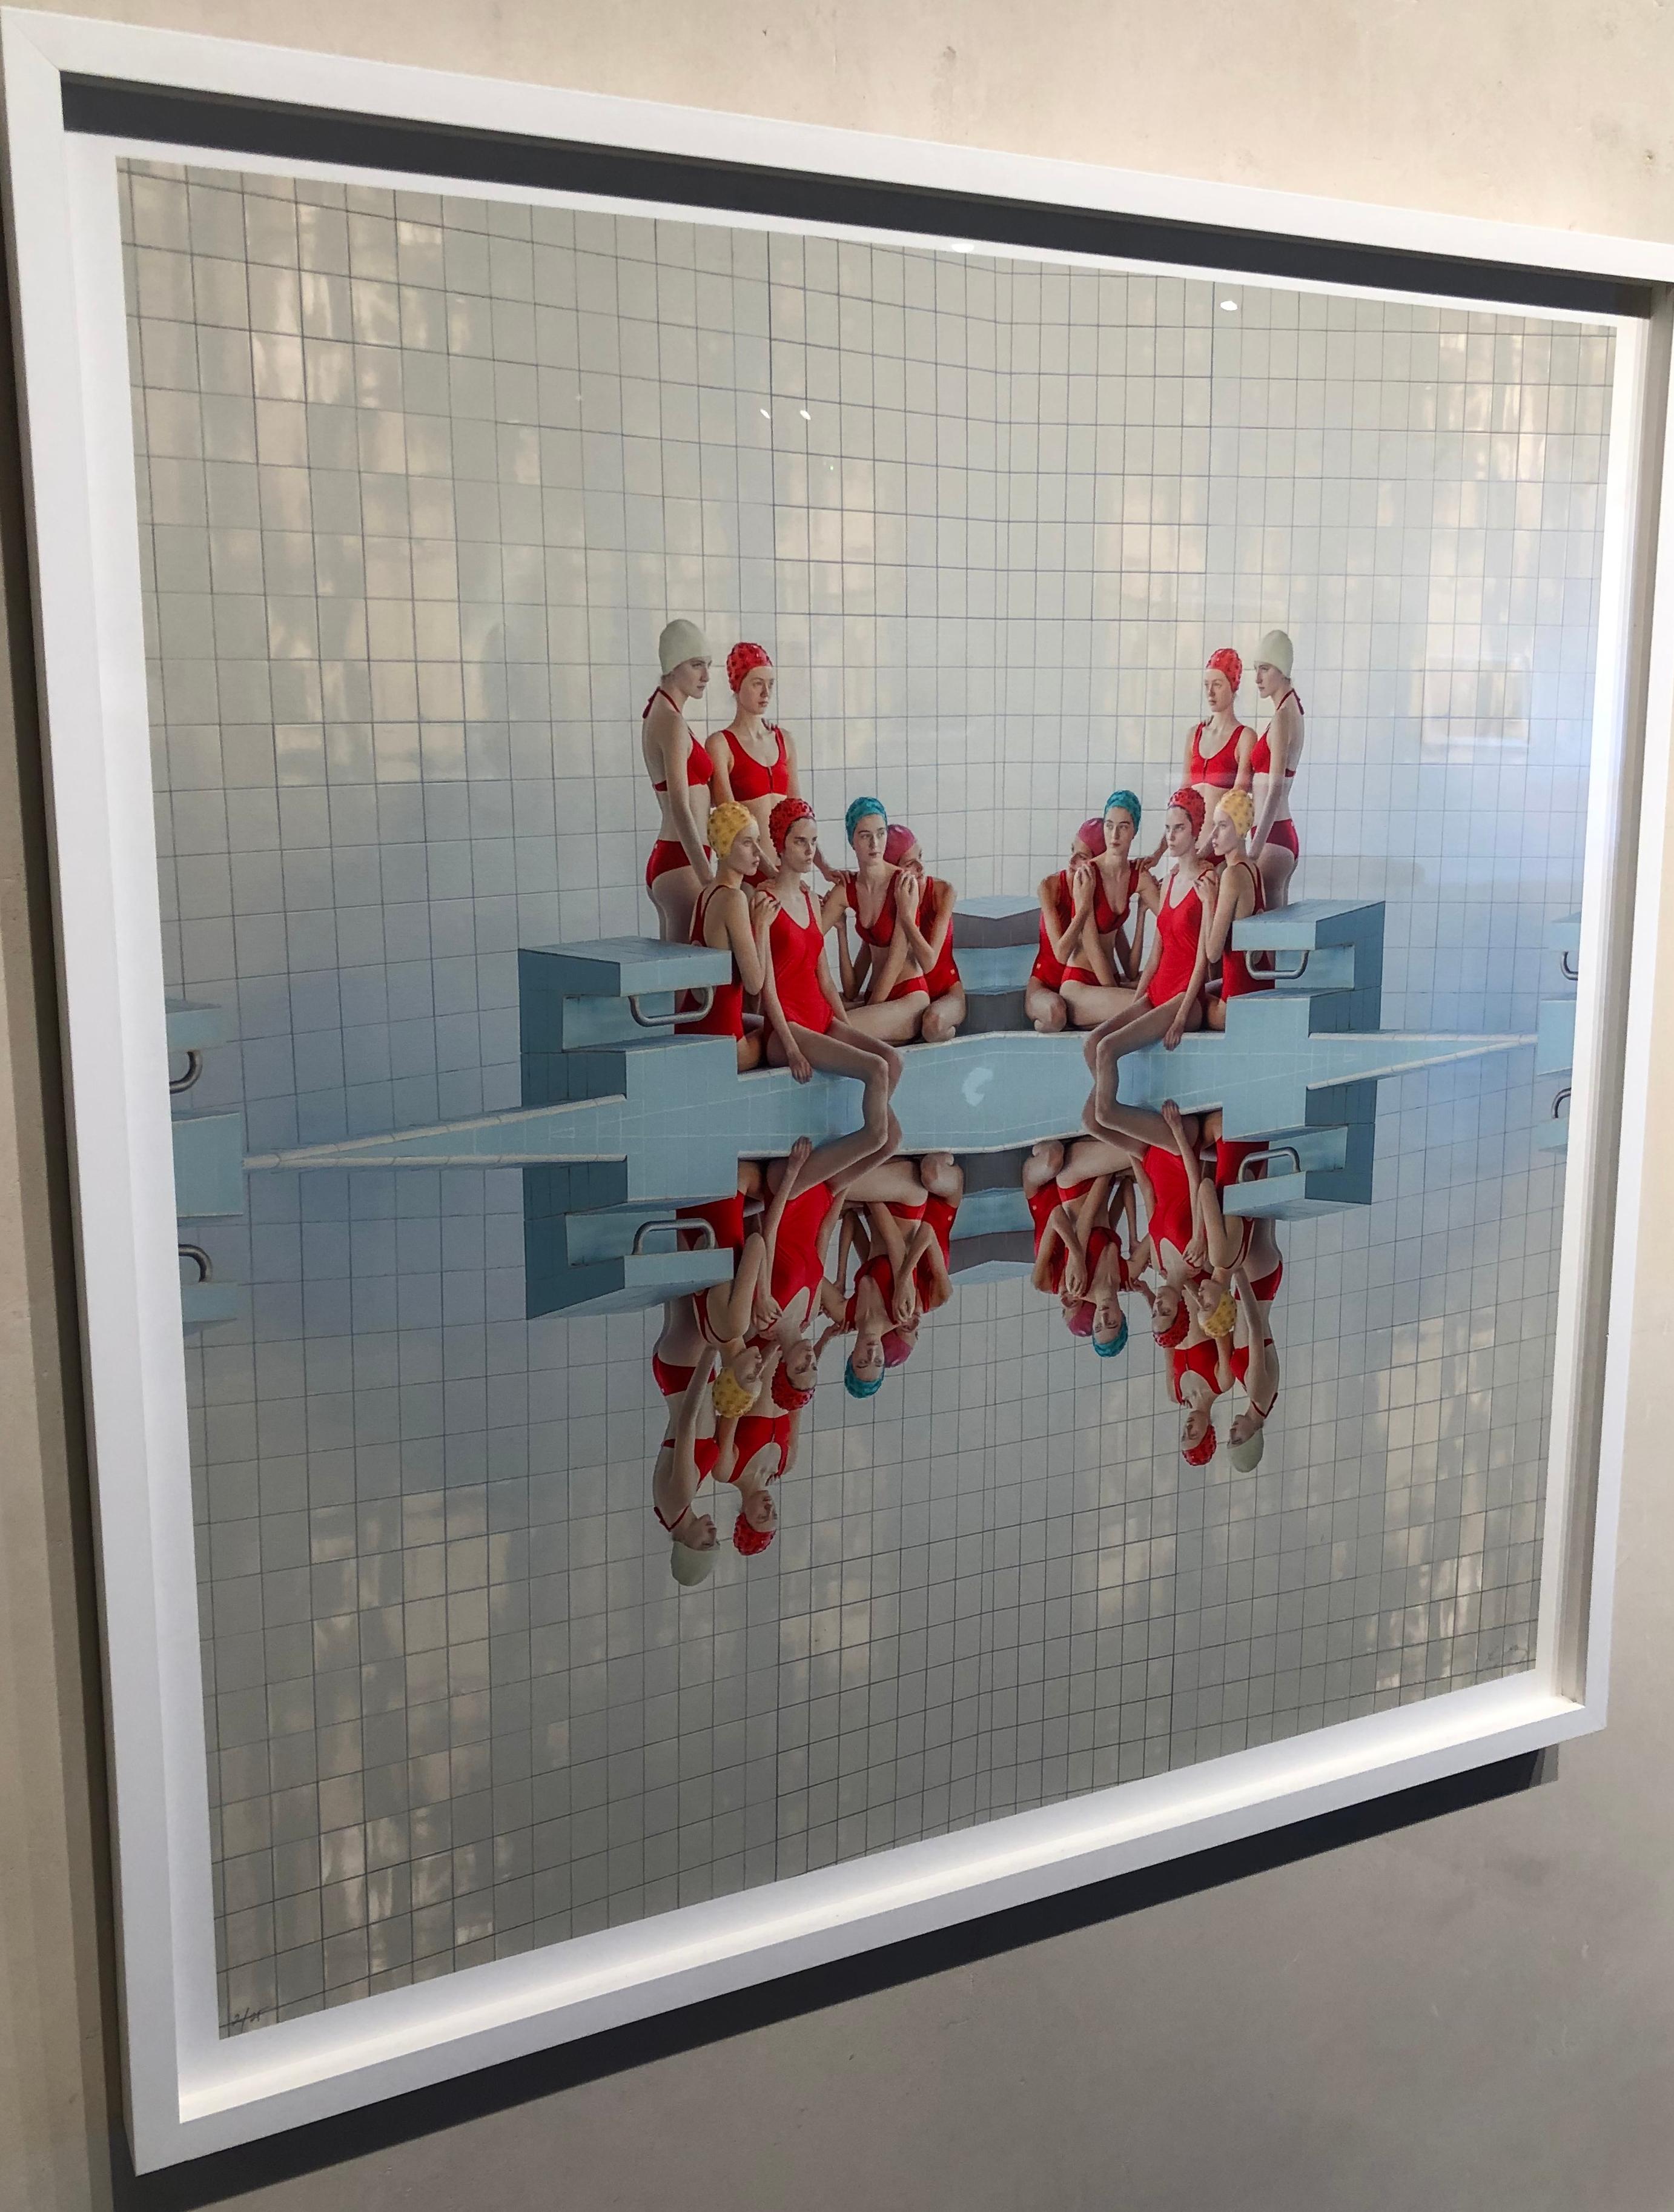 Symmetry- framed 30 x 30 geometric figurative photograph in reds and blues  - Contemporary Photograph by Maria Svarbova